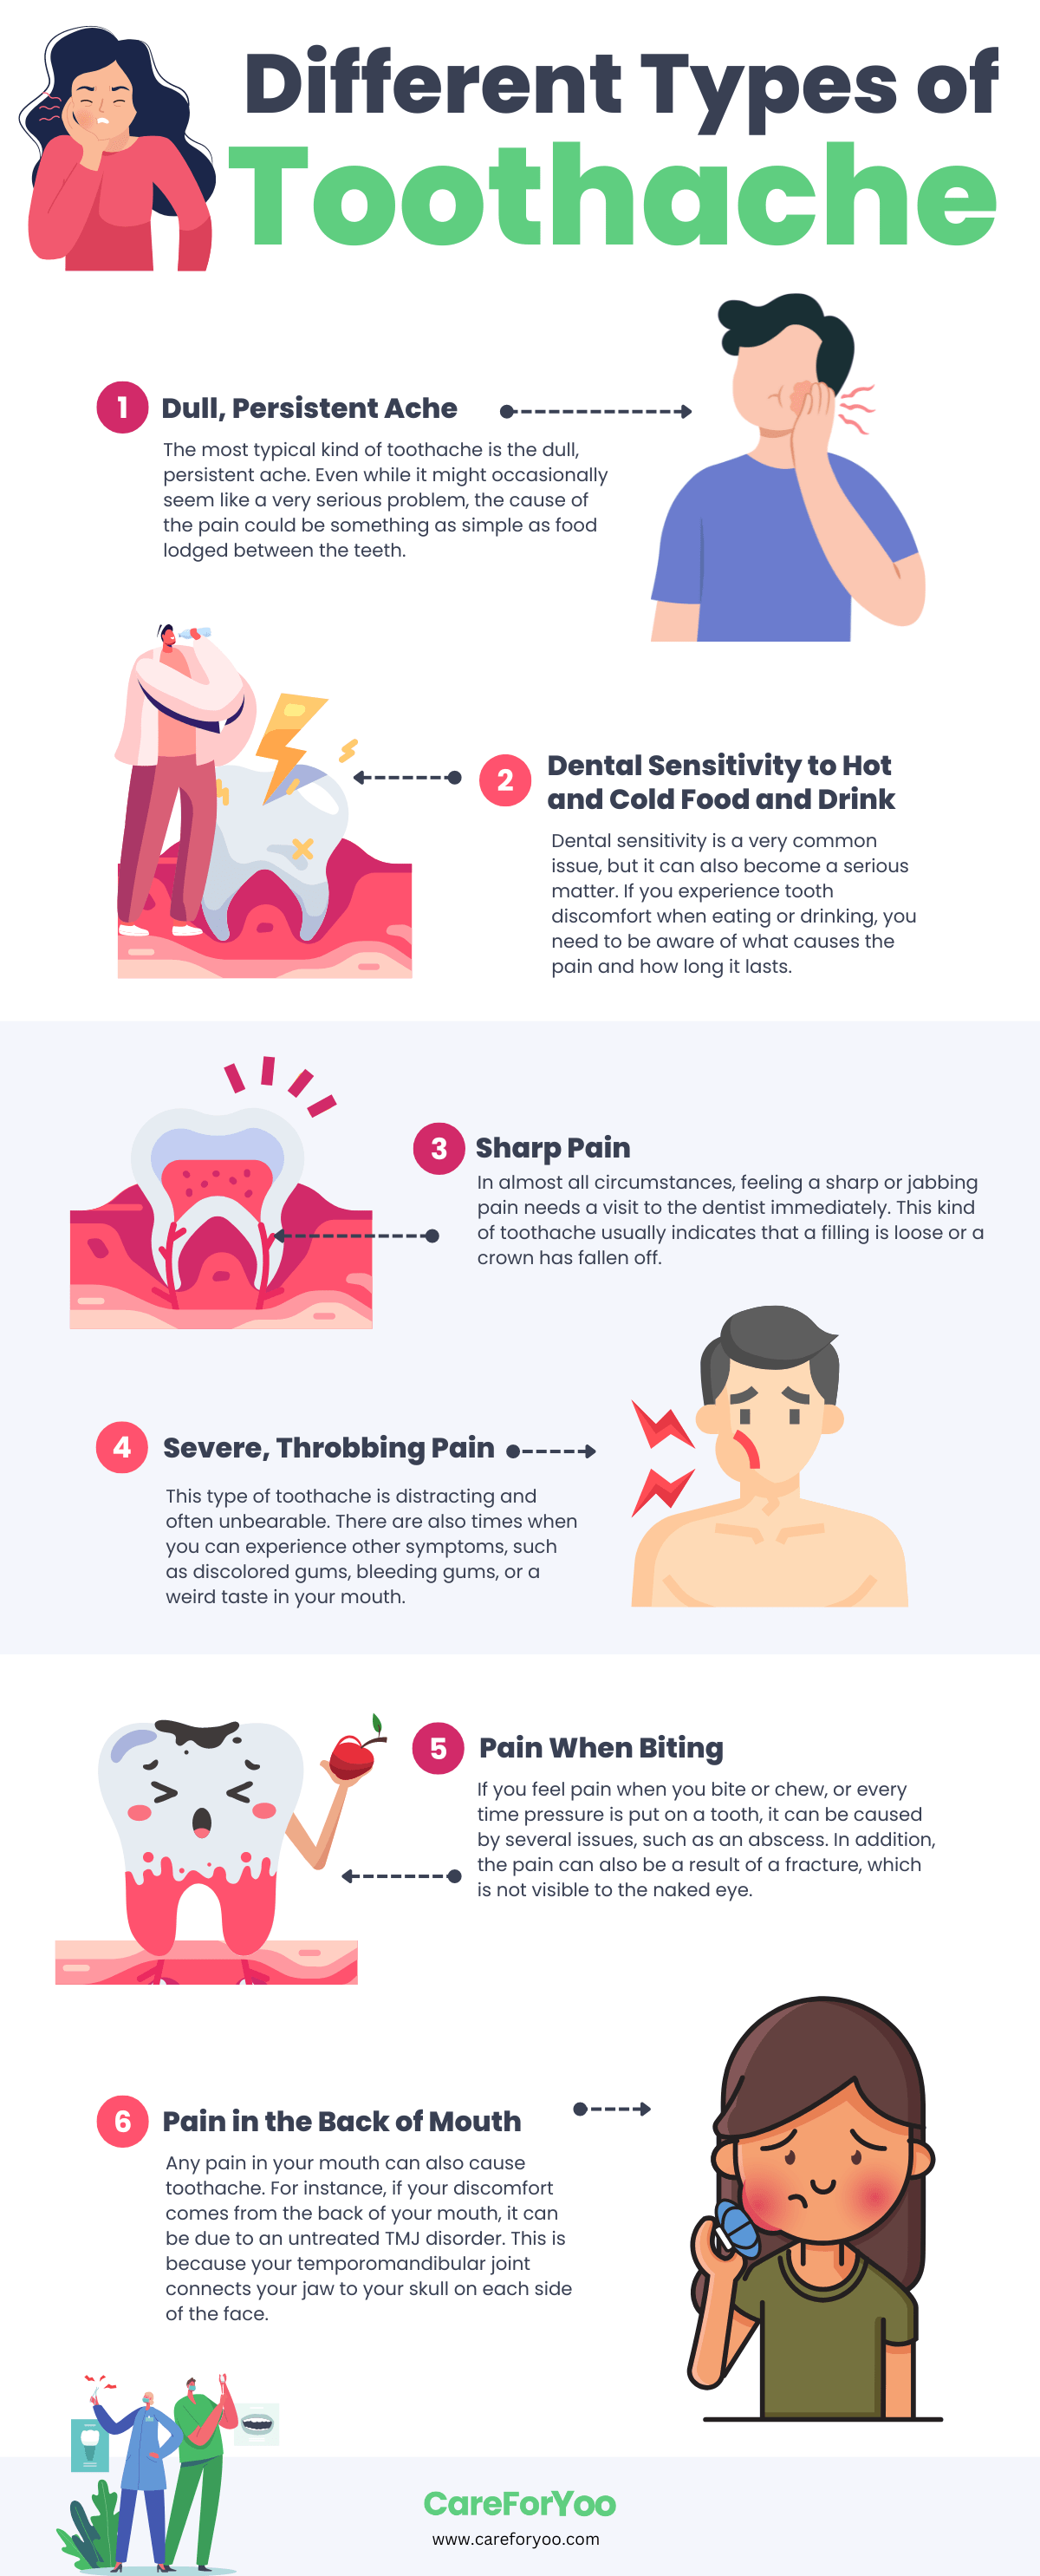 An explanation of the different types of toothache